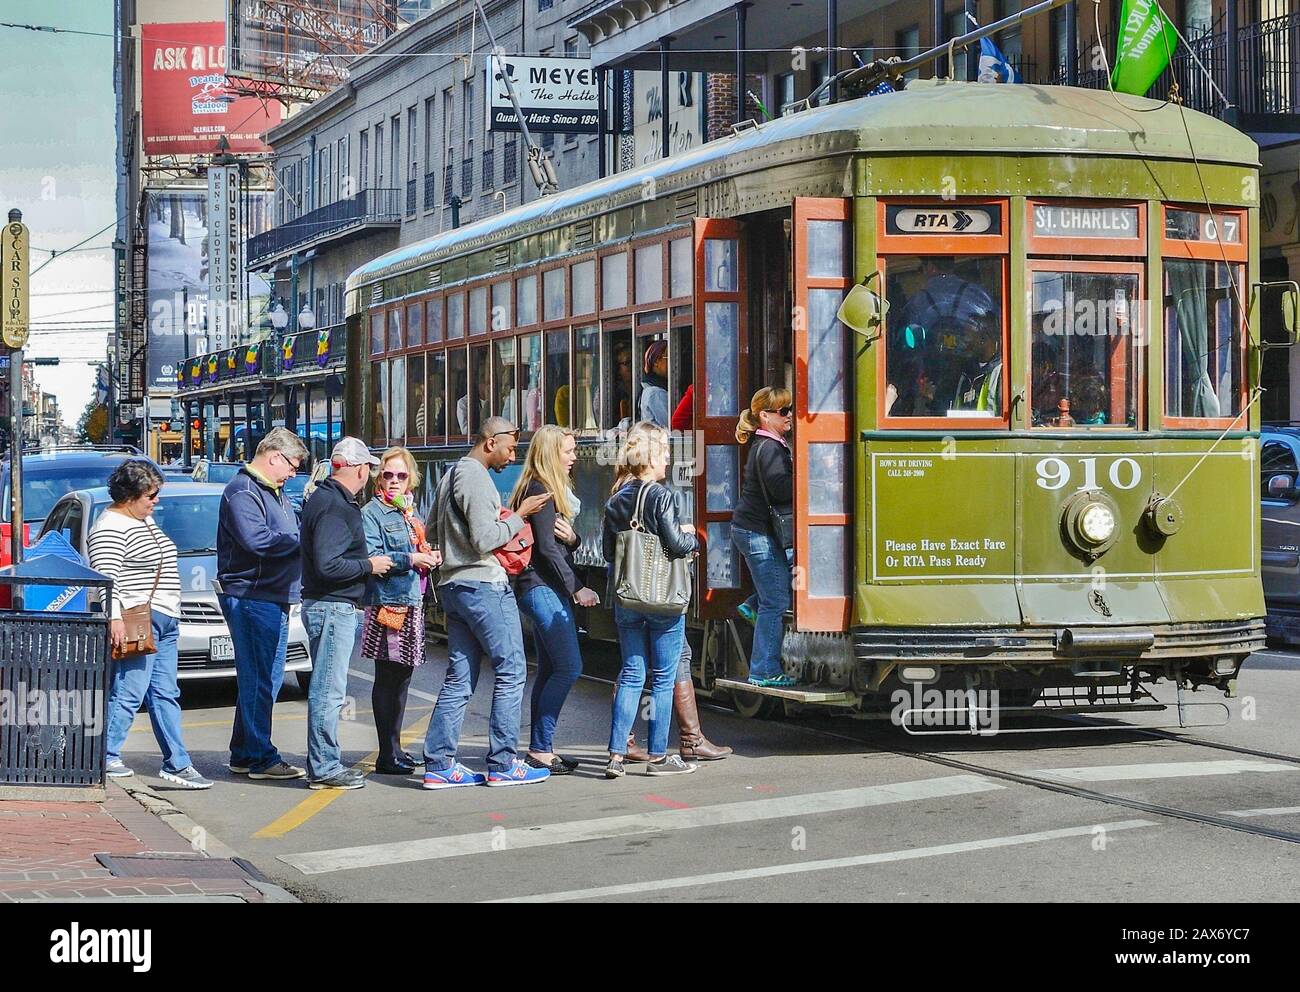 People Boarding the St. Charles Streetcar in New Orleans, Louisiana Stock Photo